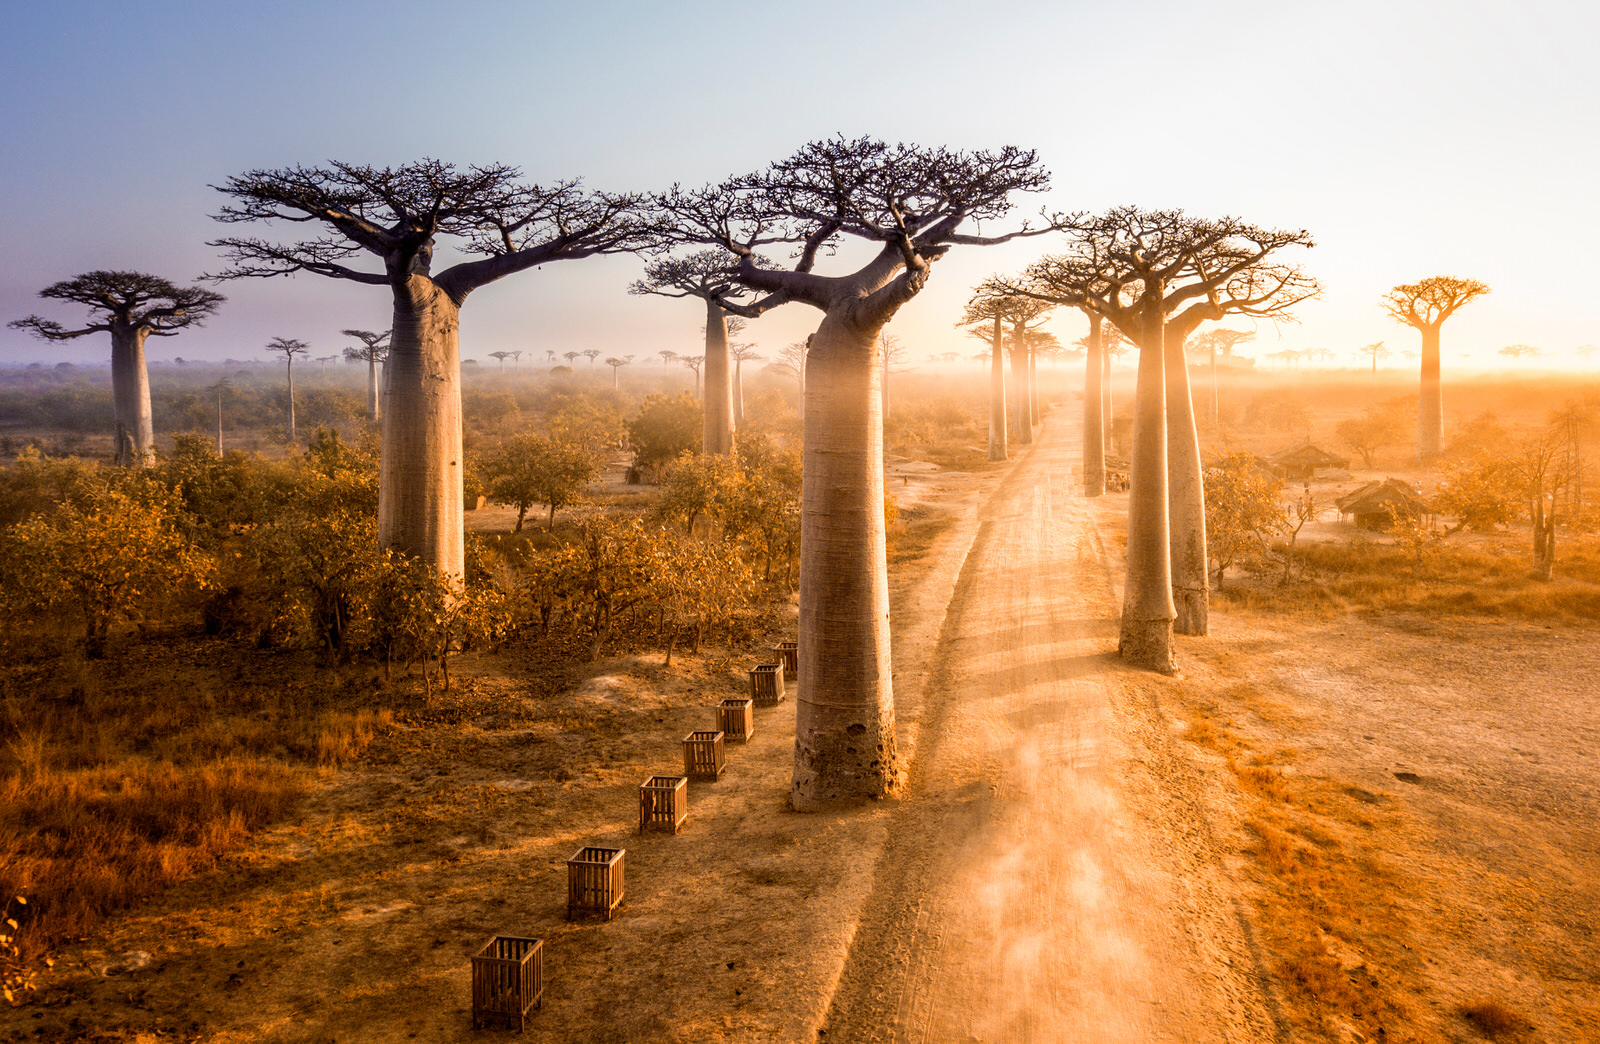 Can You Pass This 40-Question Geography Test That Gets Progressively Harder With Each Question? Avenue of the Baobabs, Madagascar